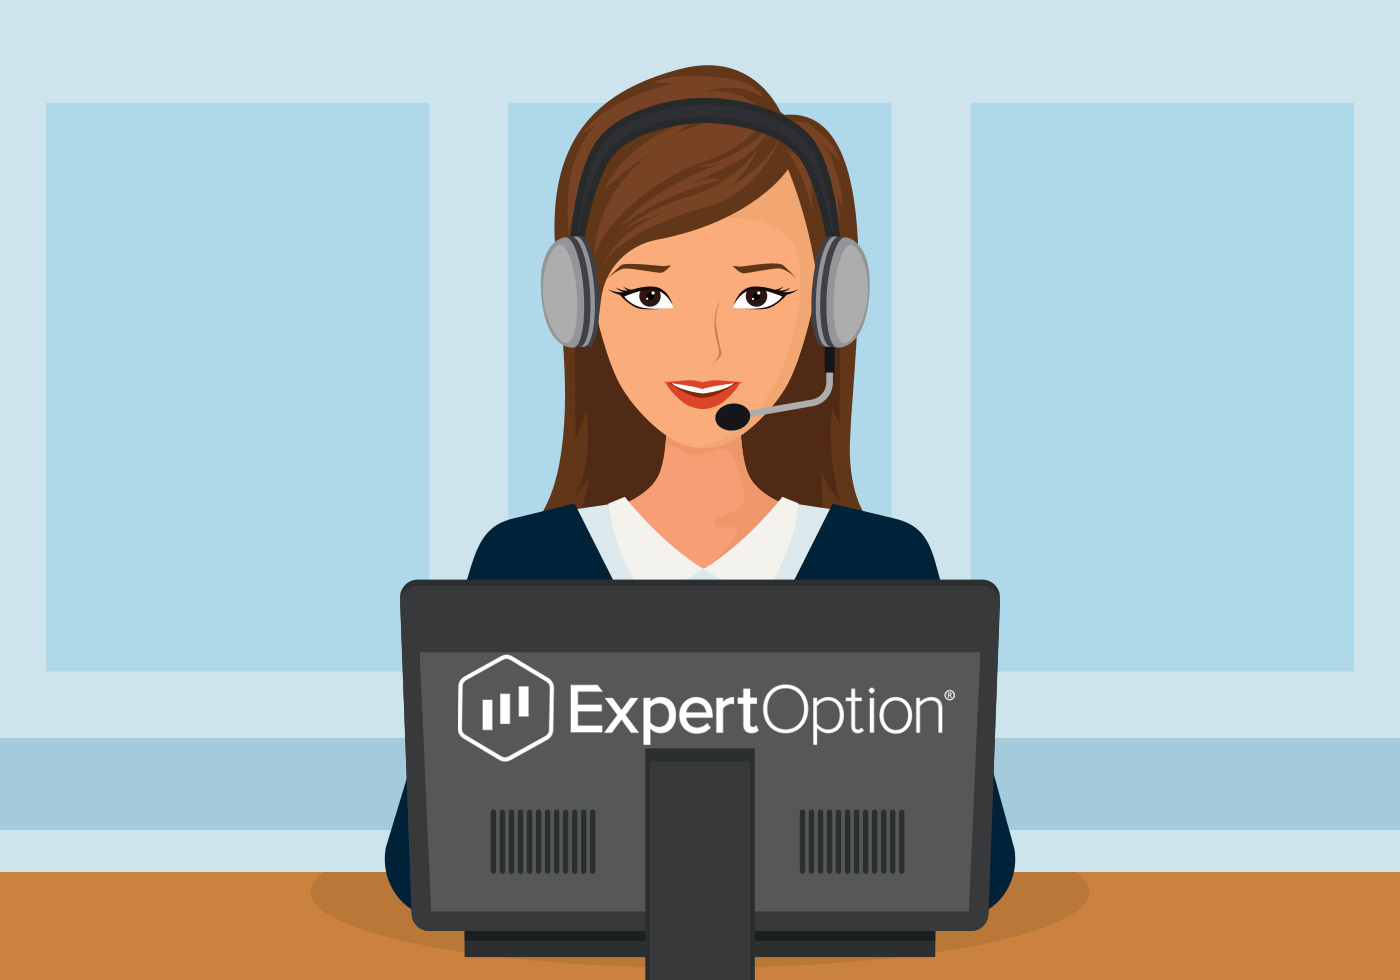 How to Contact ExpertOption Support